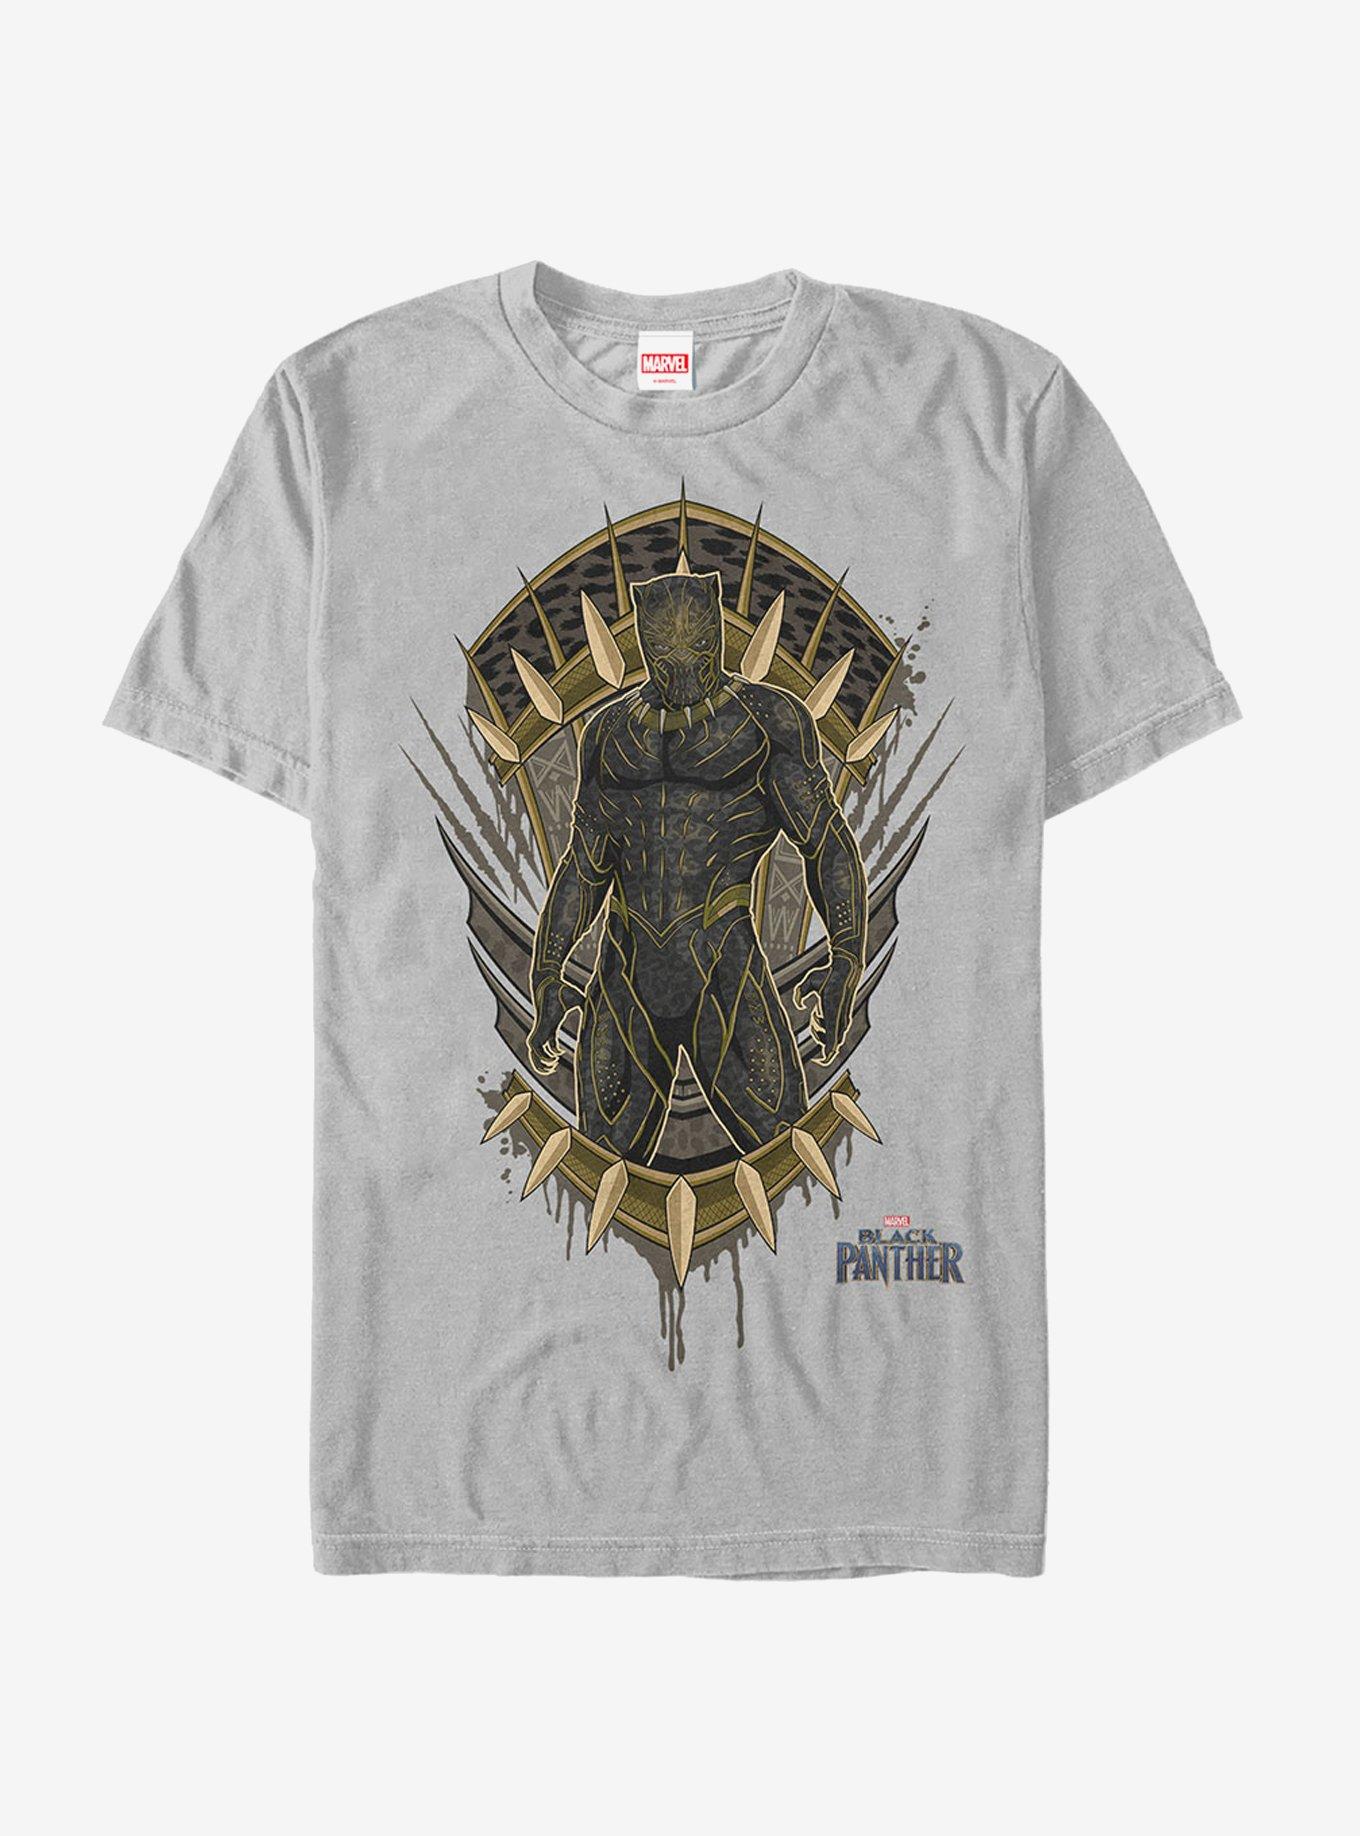 Marvel Black Panther 2018 Claw Crest T-Shirt